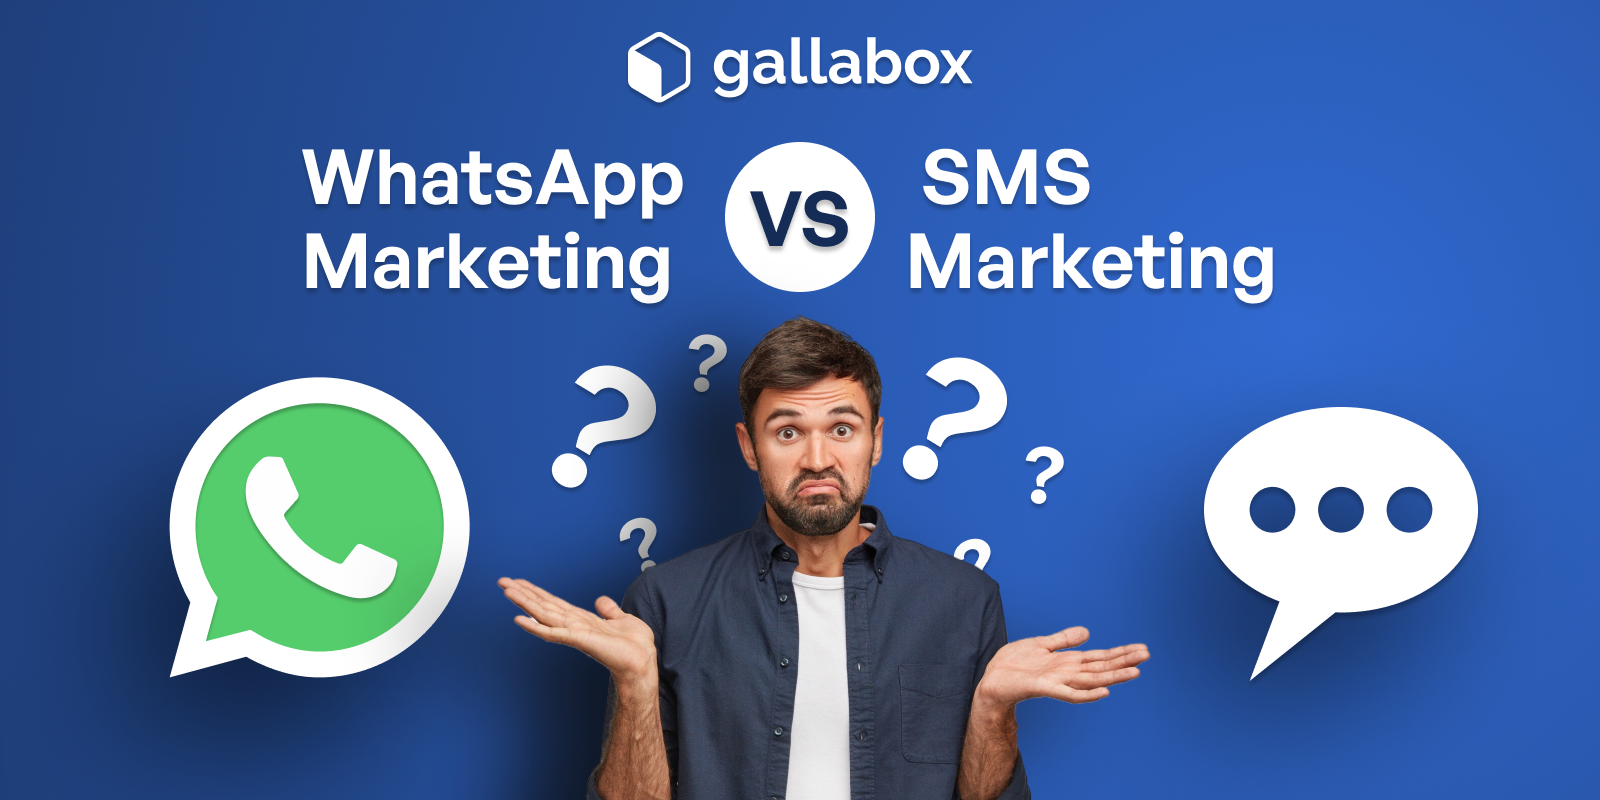 WhatsApp Marketing vs SMS Marketing: Which is Best for Your Business?